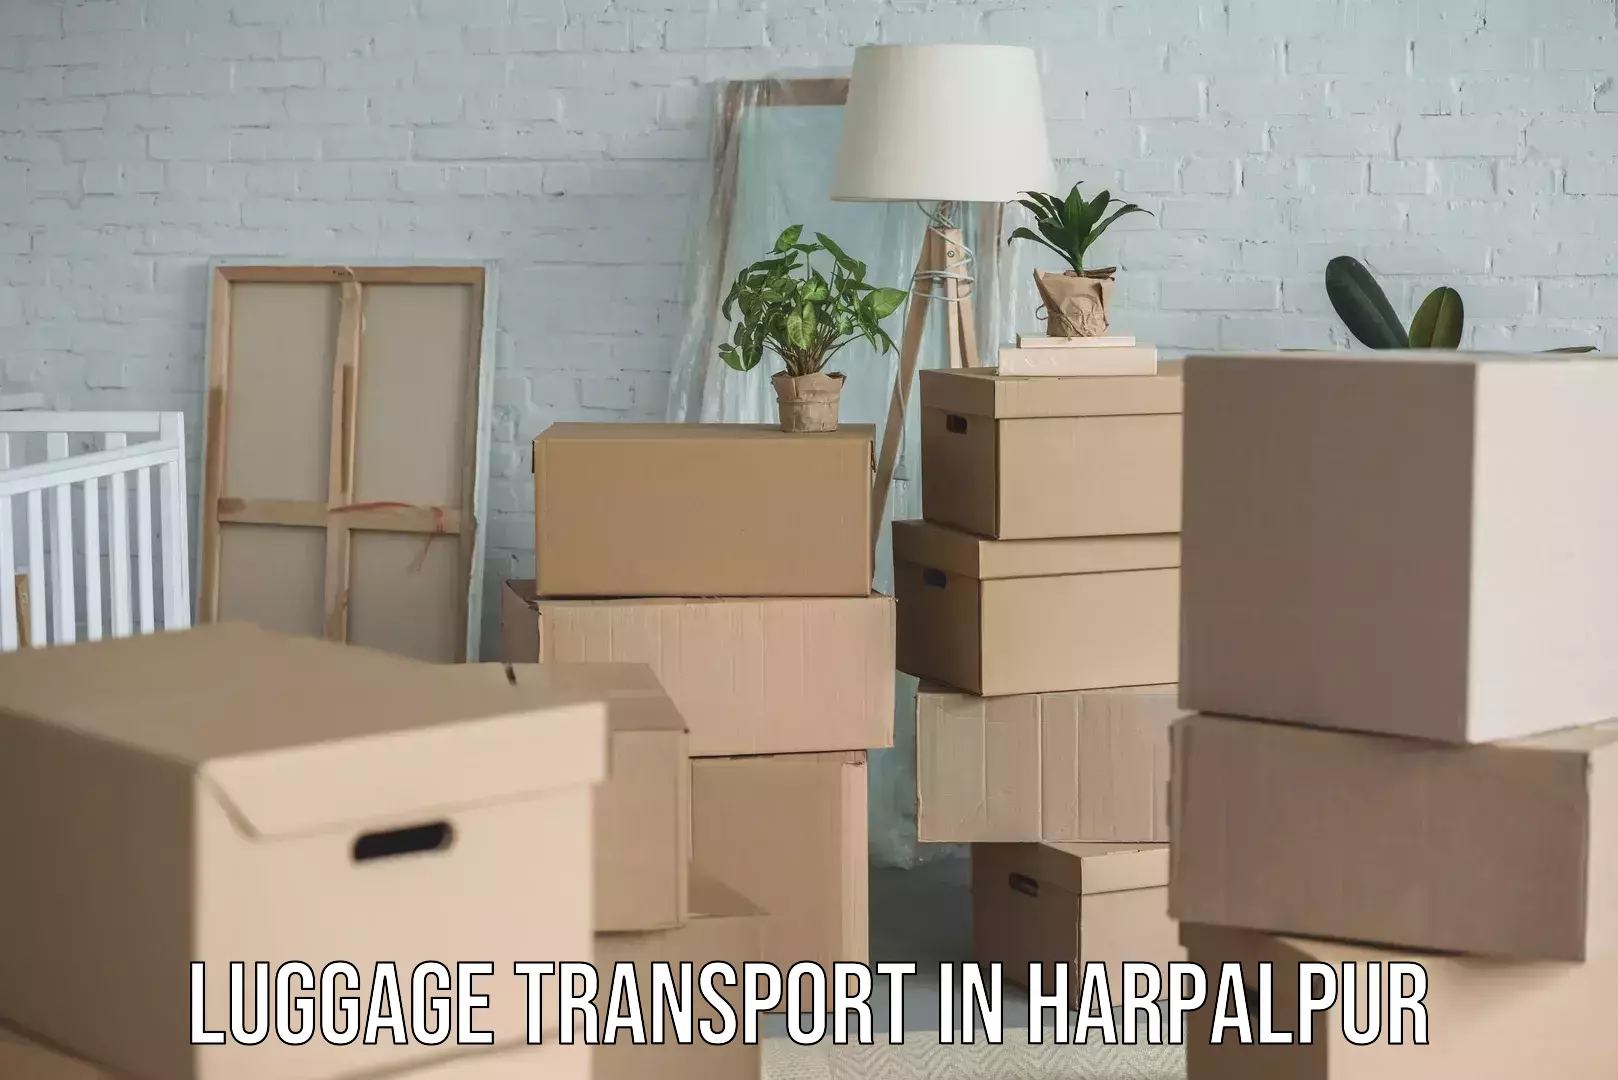 Heavy luggage shipping in Harpalpur